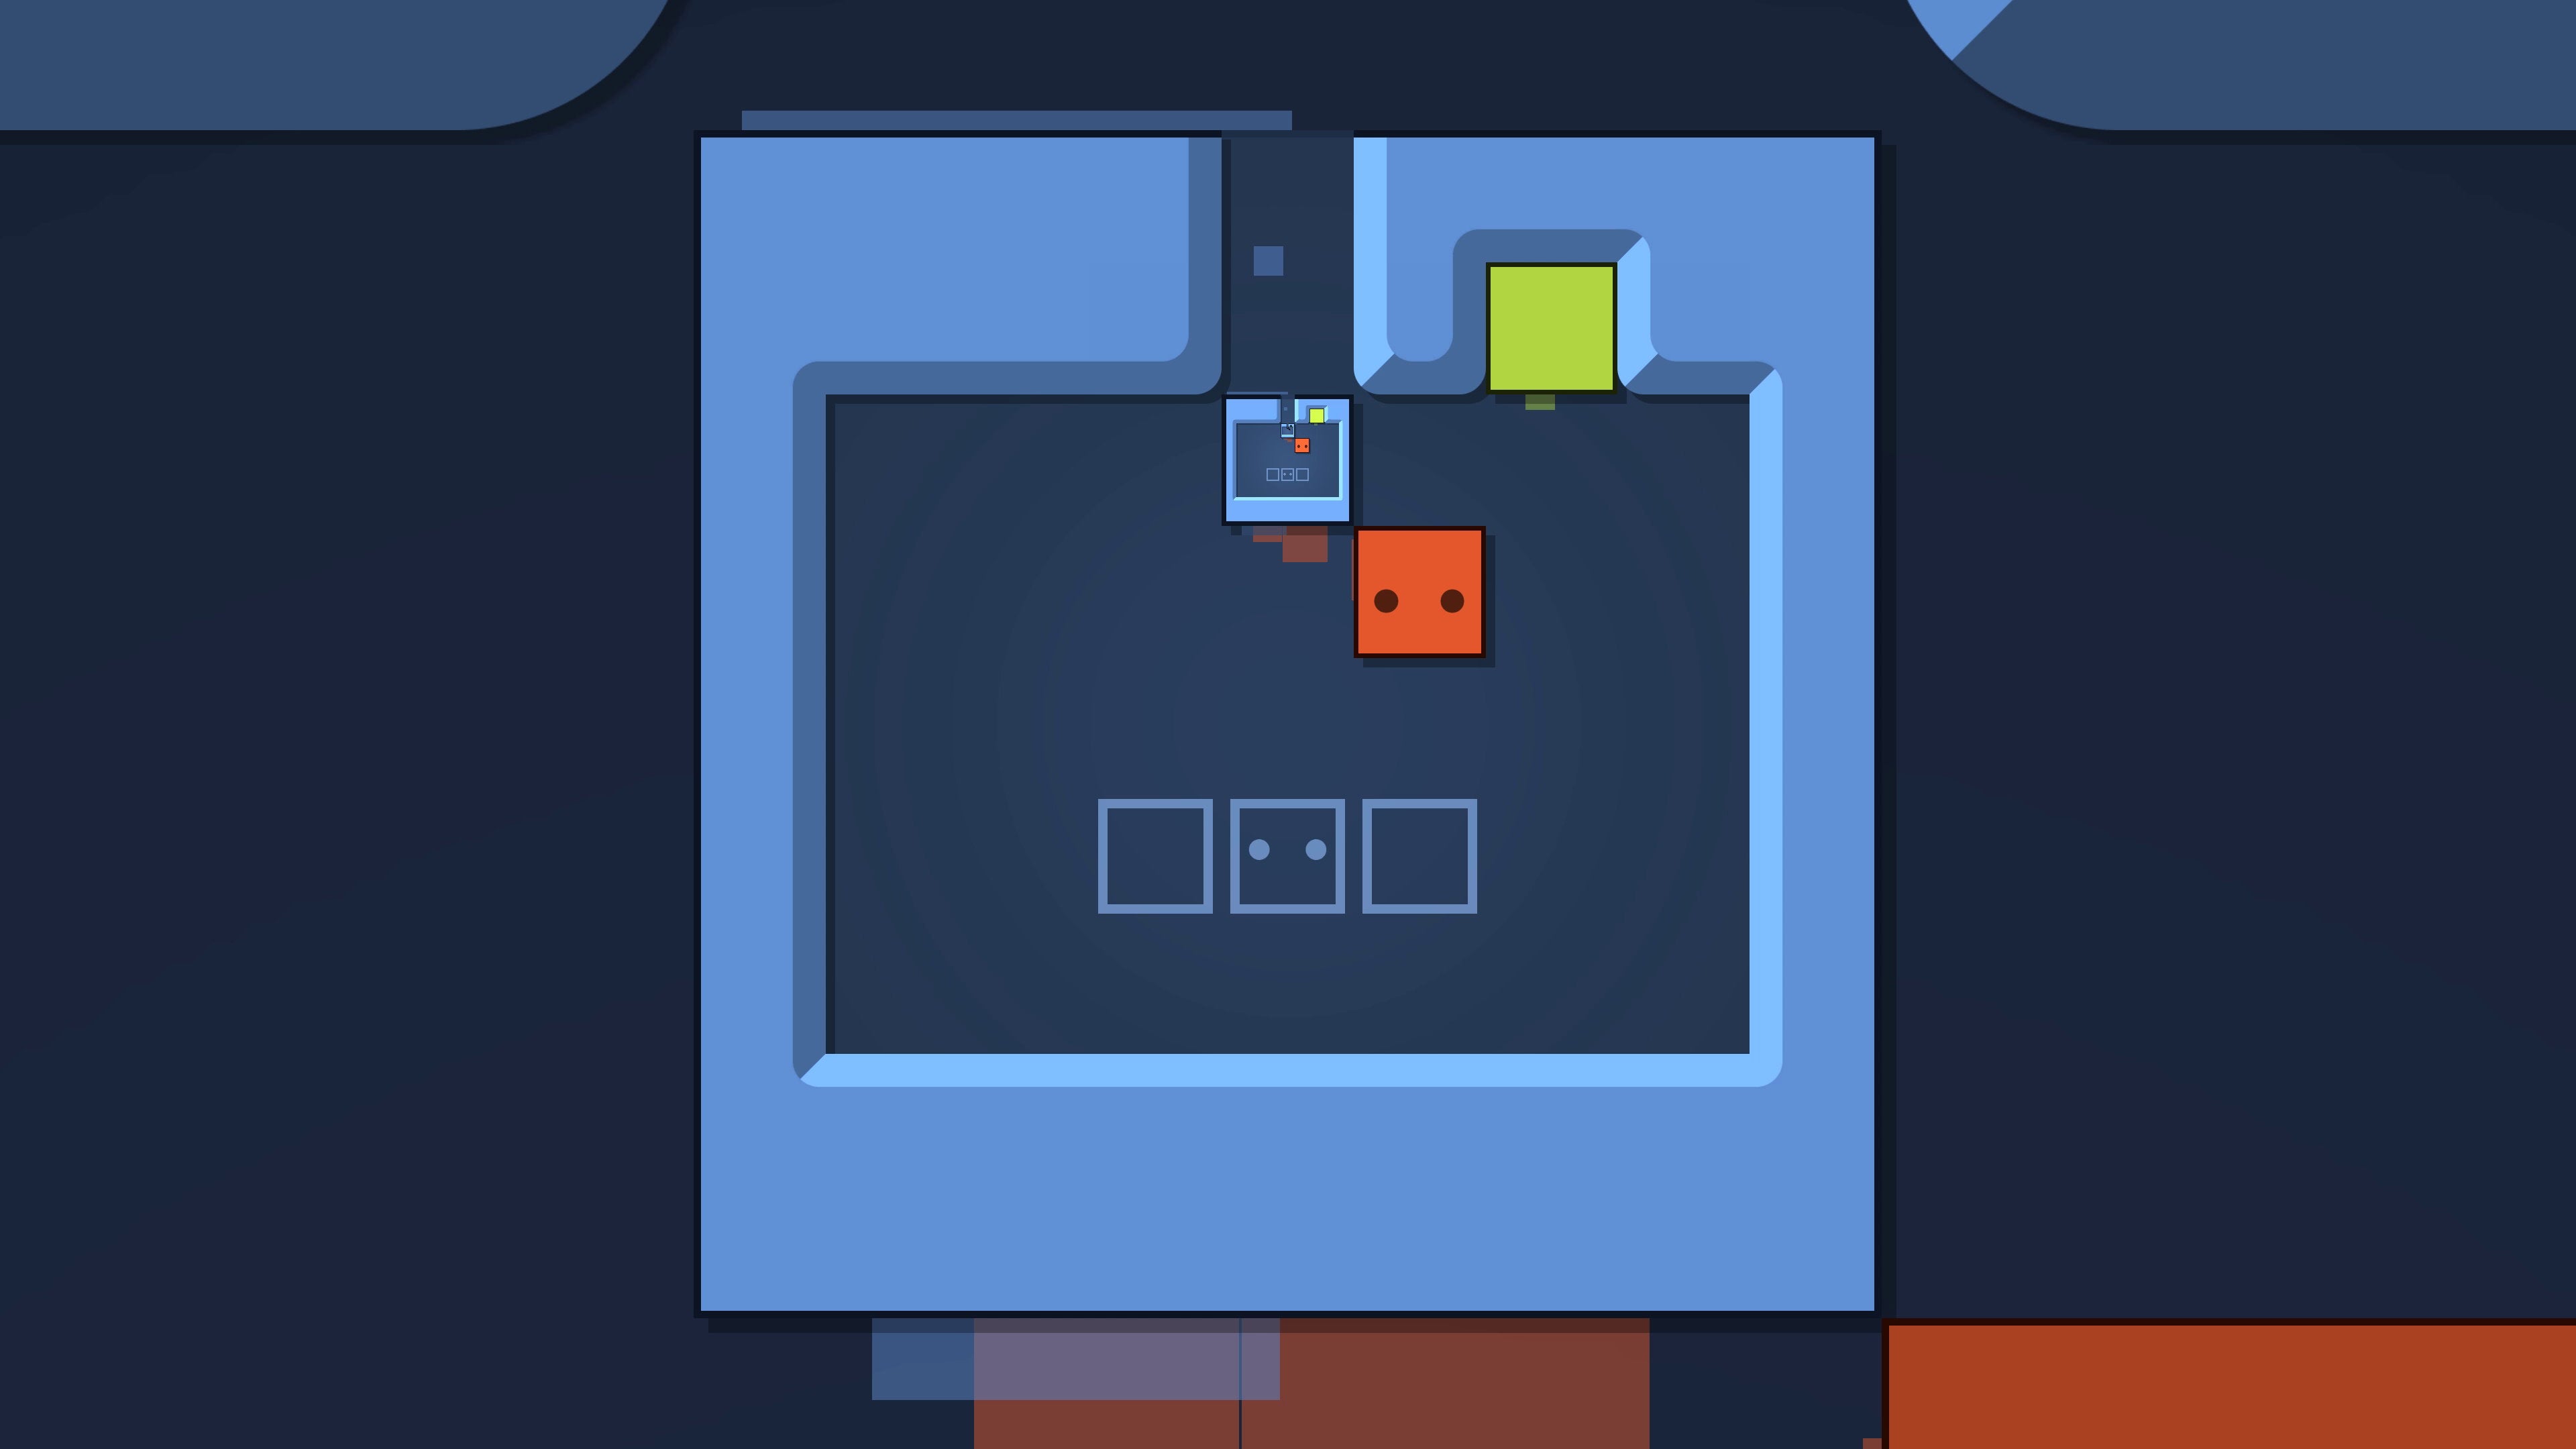 A red cube pushes other cubes around inside another cube in Patrick's Parabox